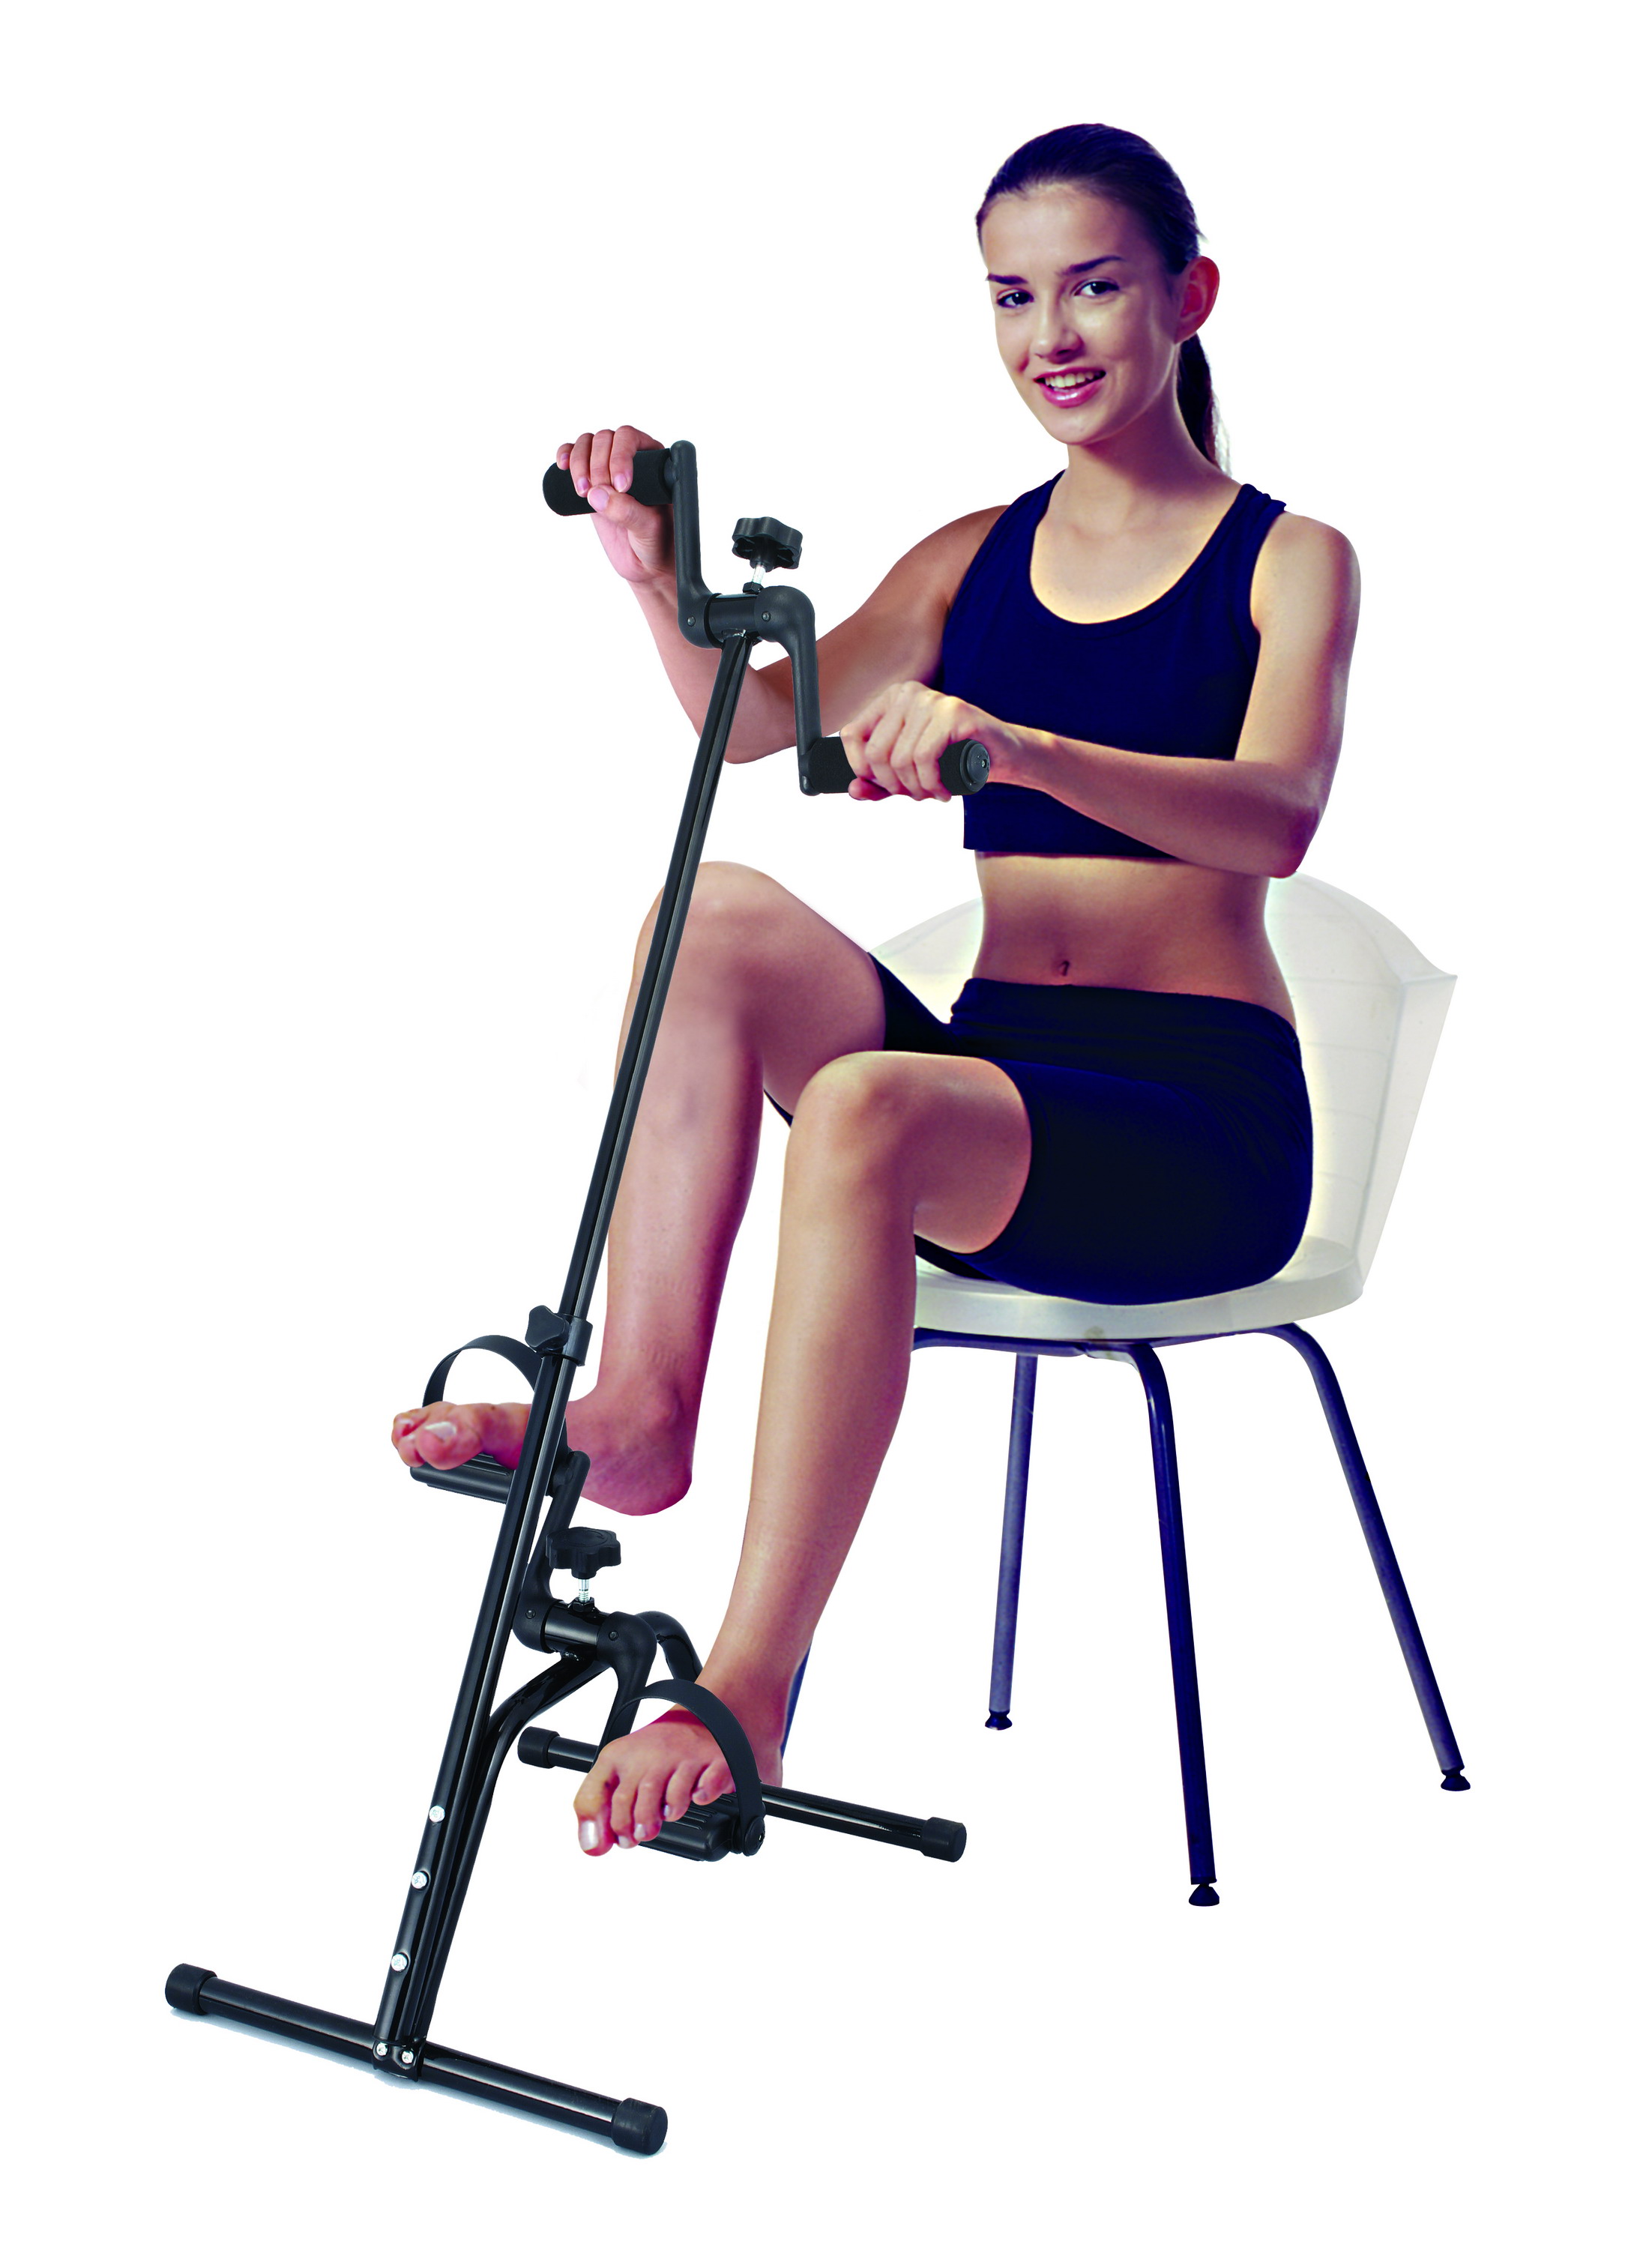 BetaFlex Portable Total-Body Mini Exercise Bike Work Out for both Arms and Legs at the same time